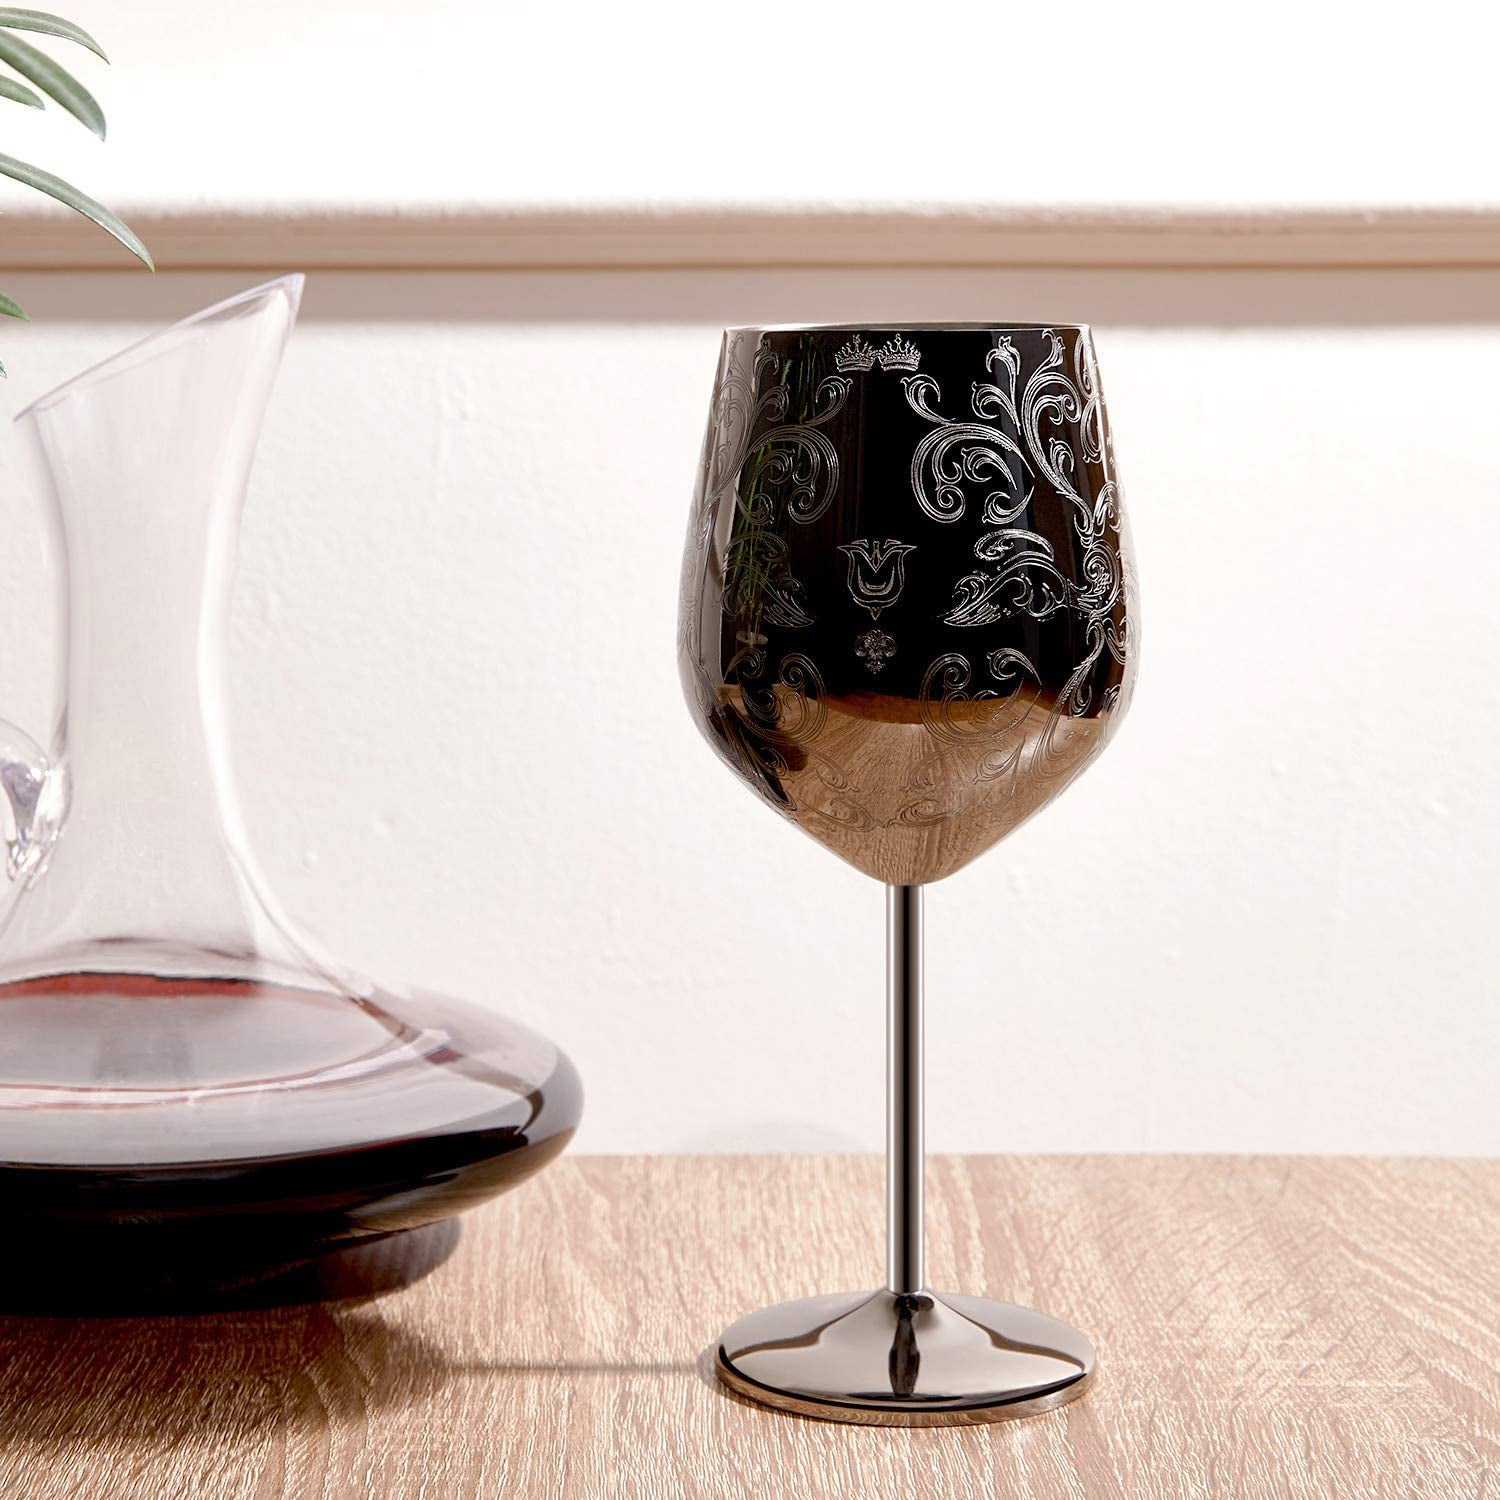 wine glass with etched design on it